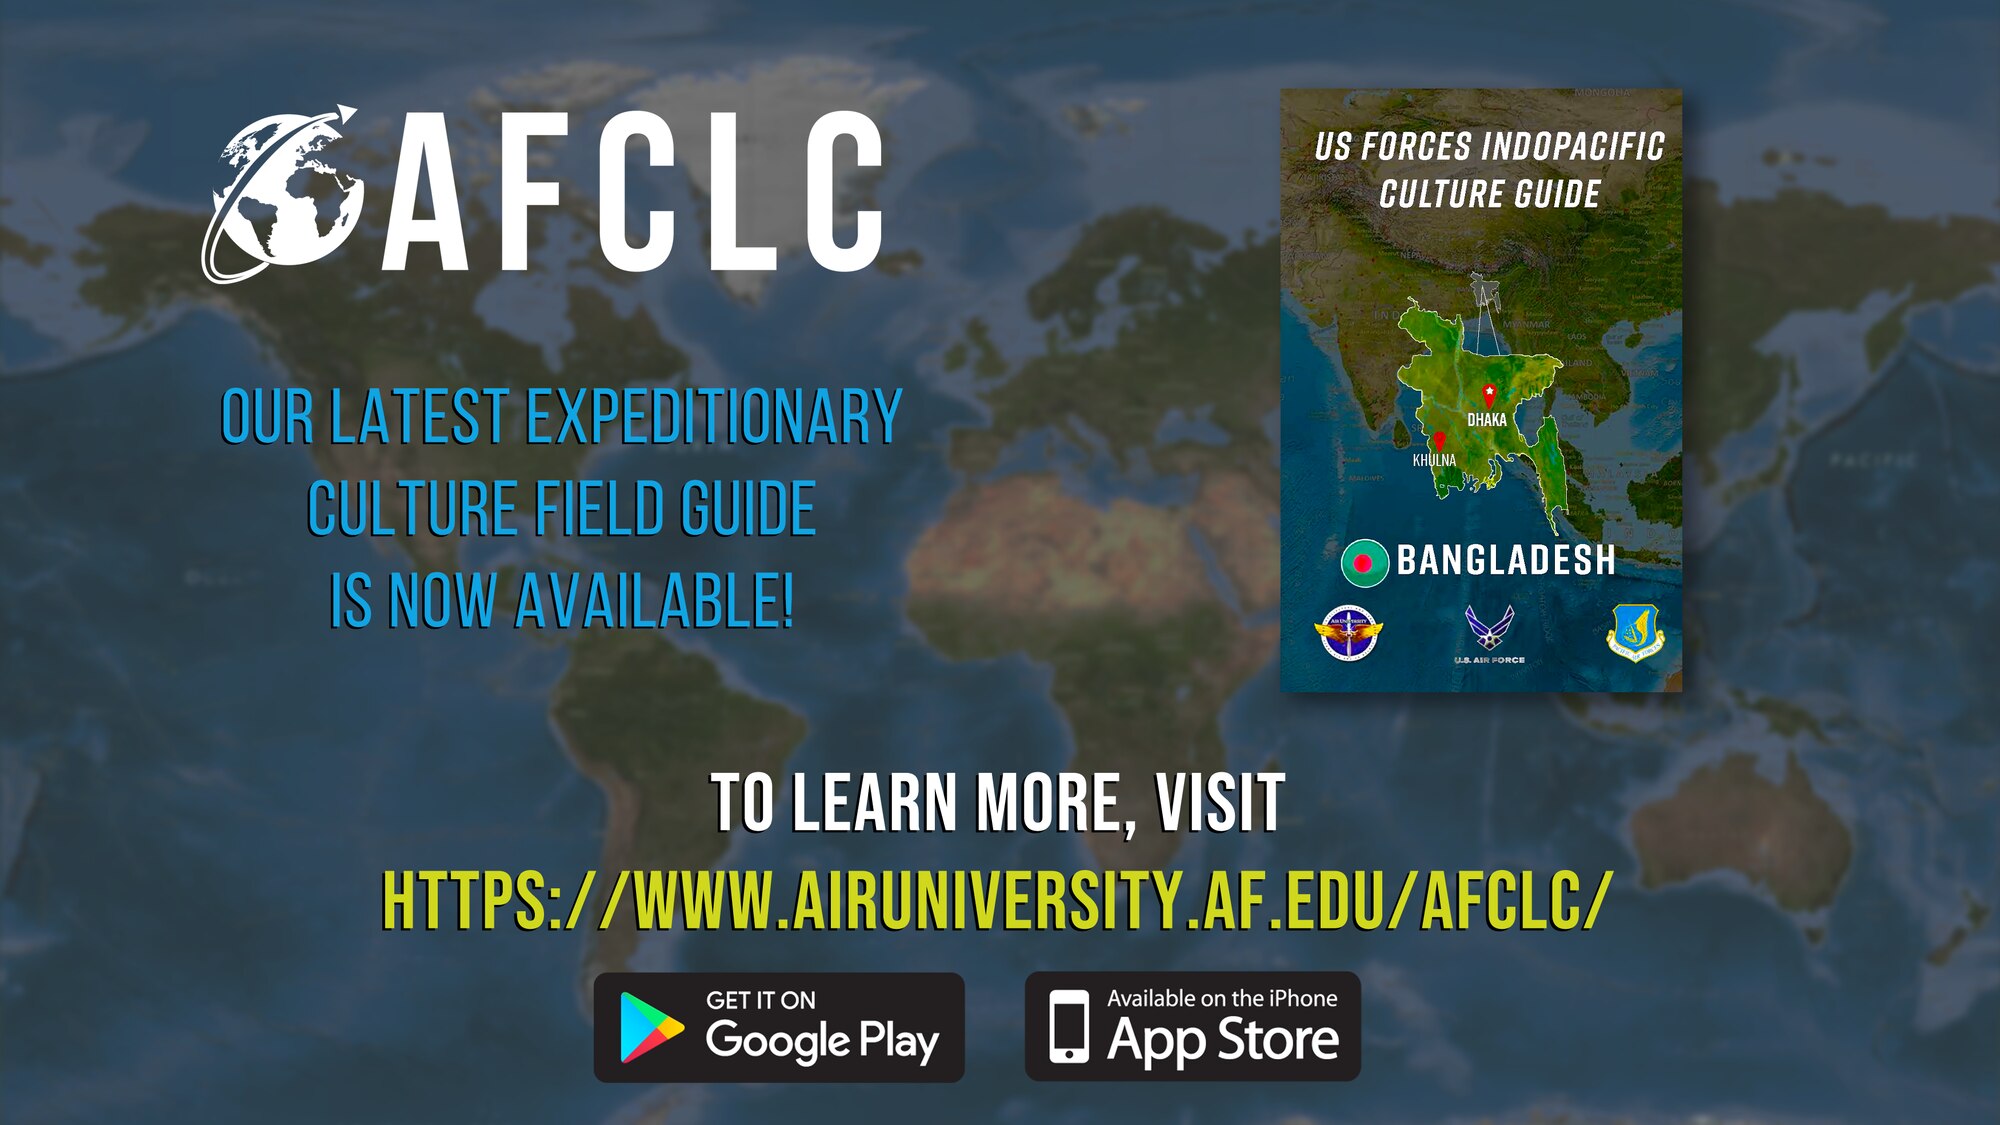 Expeditionary Culture Field Guide for Bangladesh